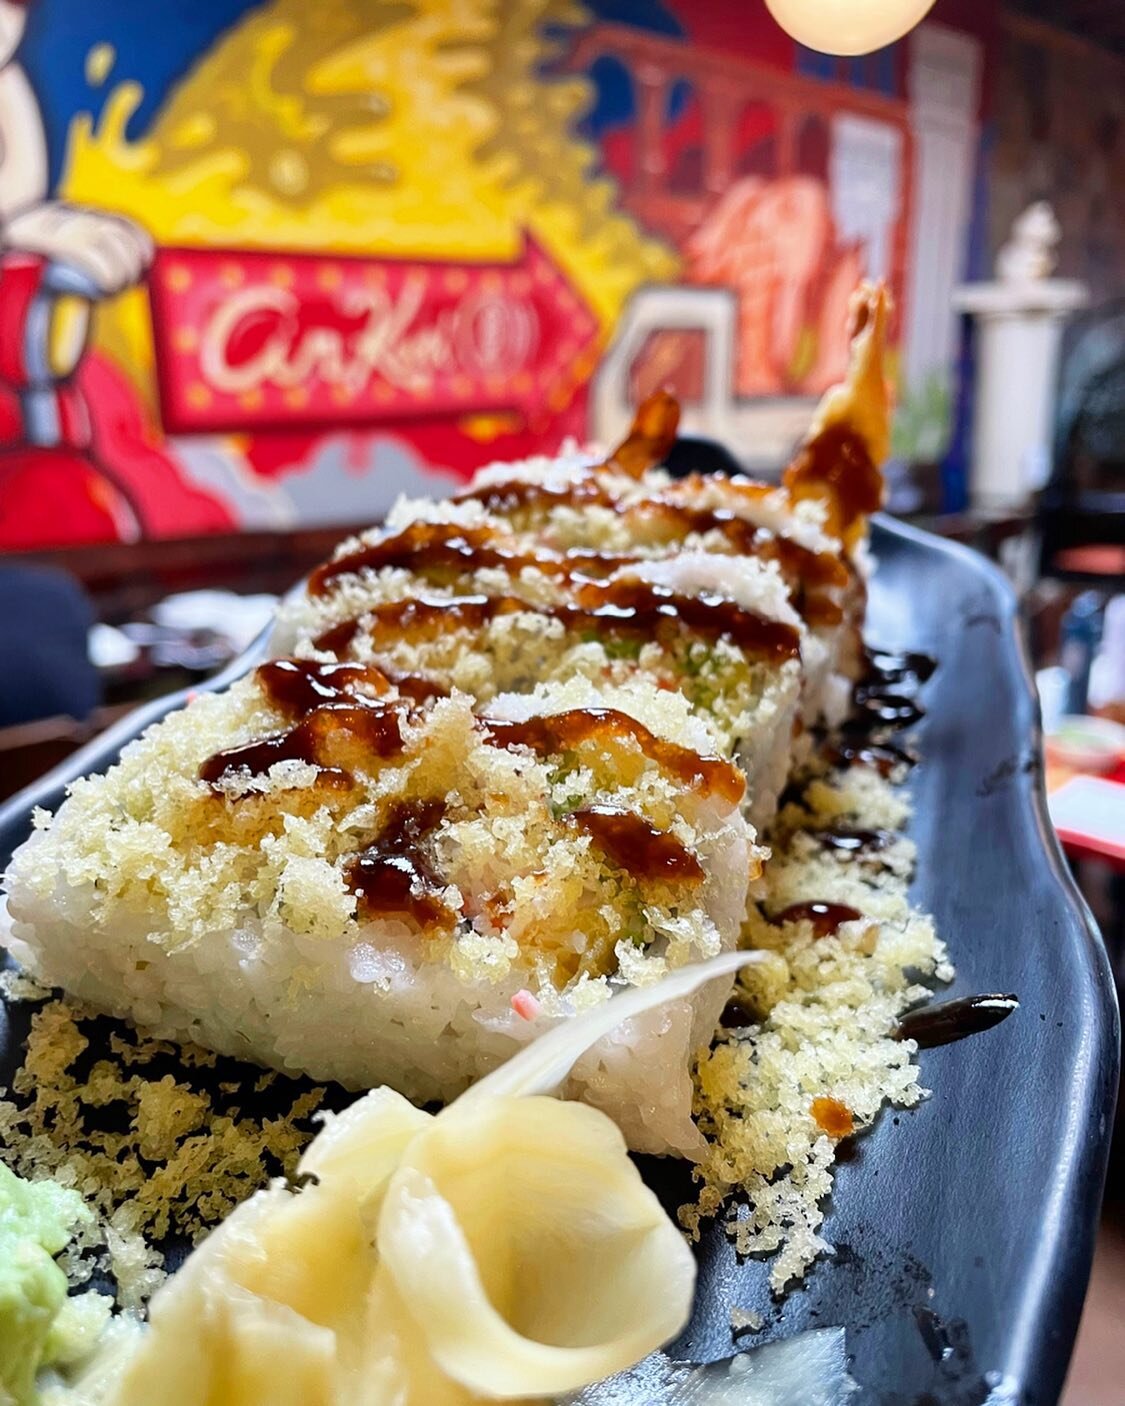 Our Crunchy Roll is one of several rolls that&rsquo;s only $10 from 4-7pm for Throwback Thursday tonight!!! 🍣💥
.
.
.
#cinkuni #northparksandiego #throwbackthursday #northparksd #30thstreet #elcajonblvd #sushi #sushiaddict #supportsmallbusiness #wom